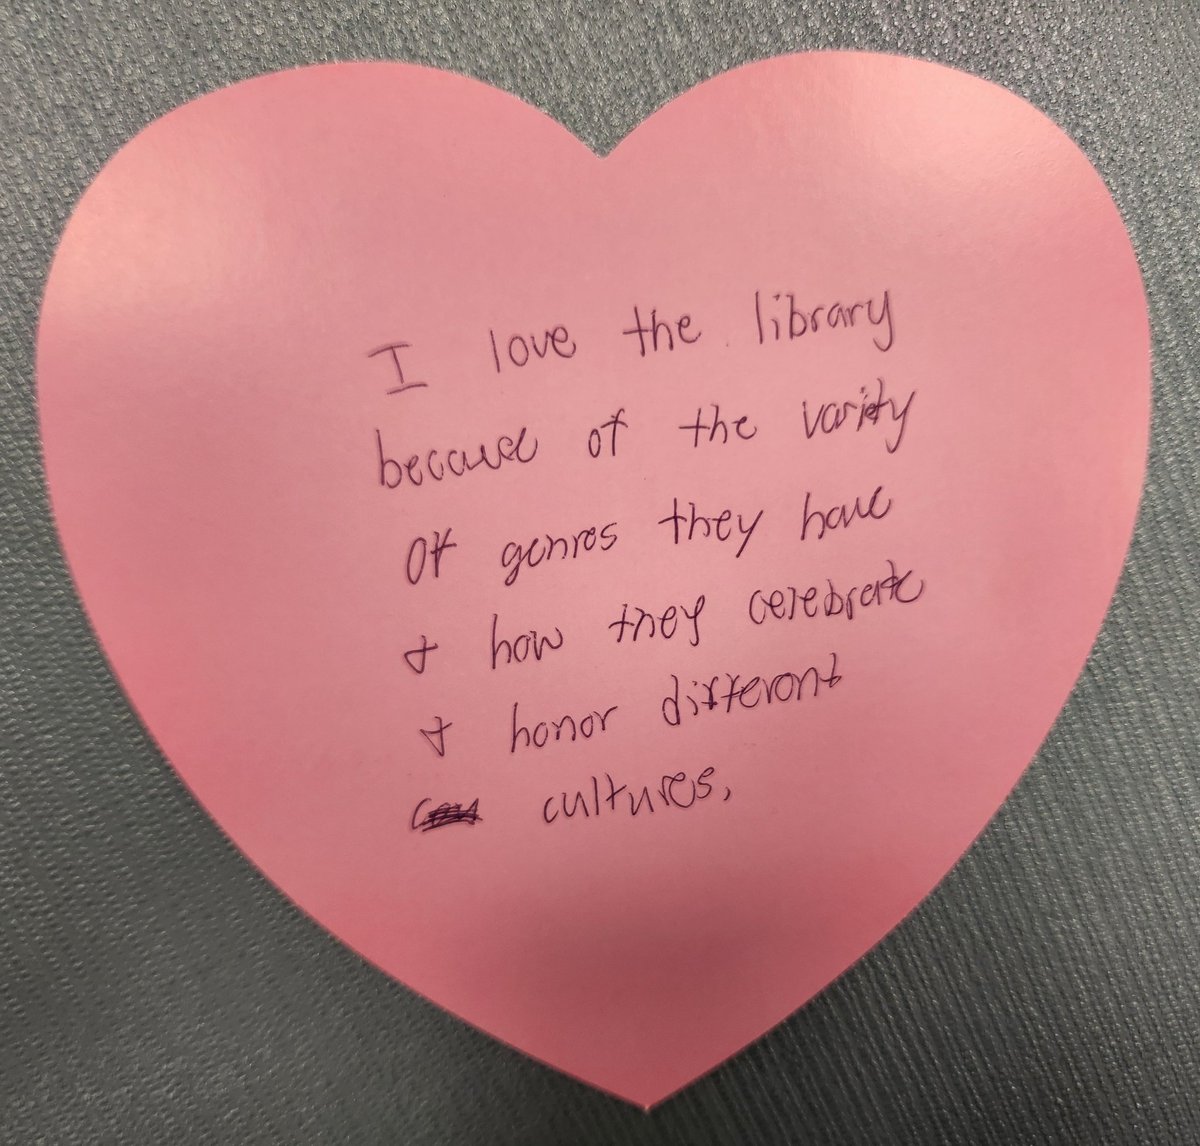 It's National School Library Month and we are enjoying what students are saying about our library. ❤️ @trishg1 @ALALibrary @LisaOckerman @Kam24Kim #librarylife